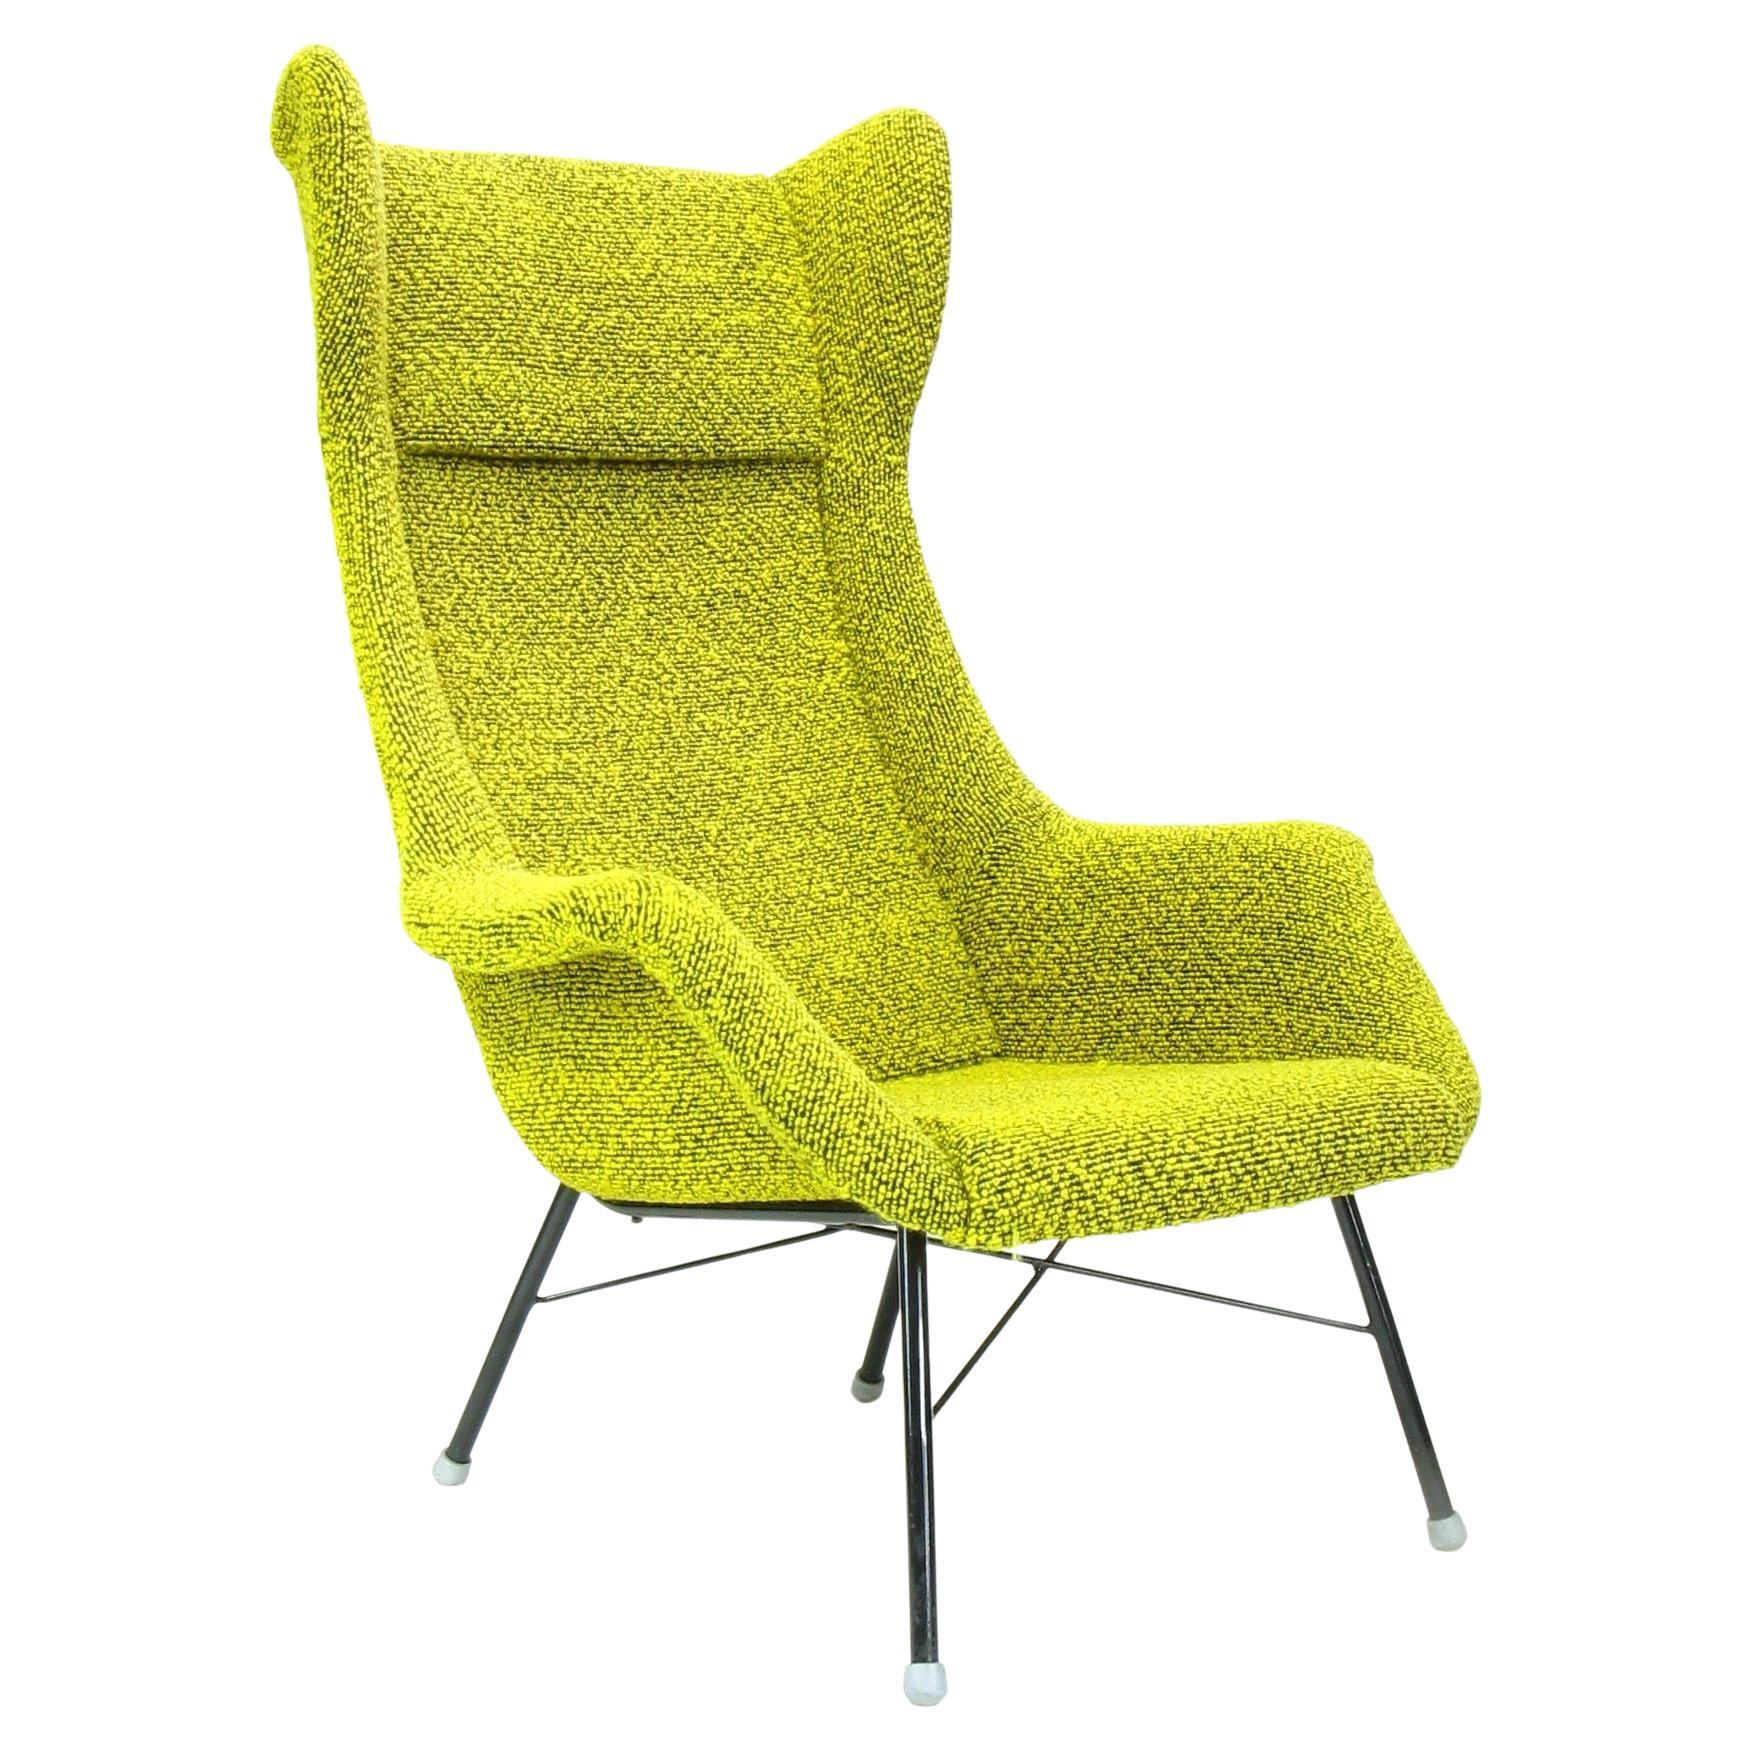 Yellow and Green Wingback Armchair by Miroslav Navratil for Ton, 1960s